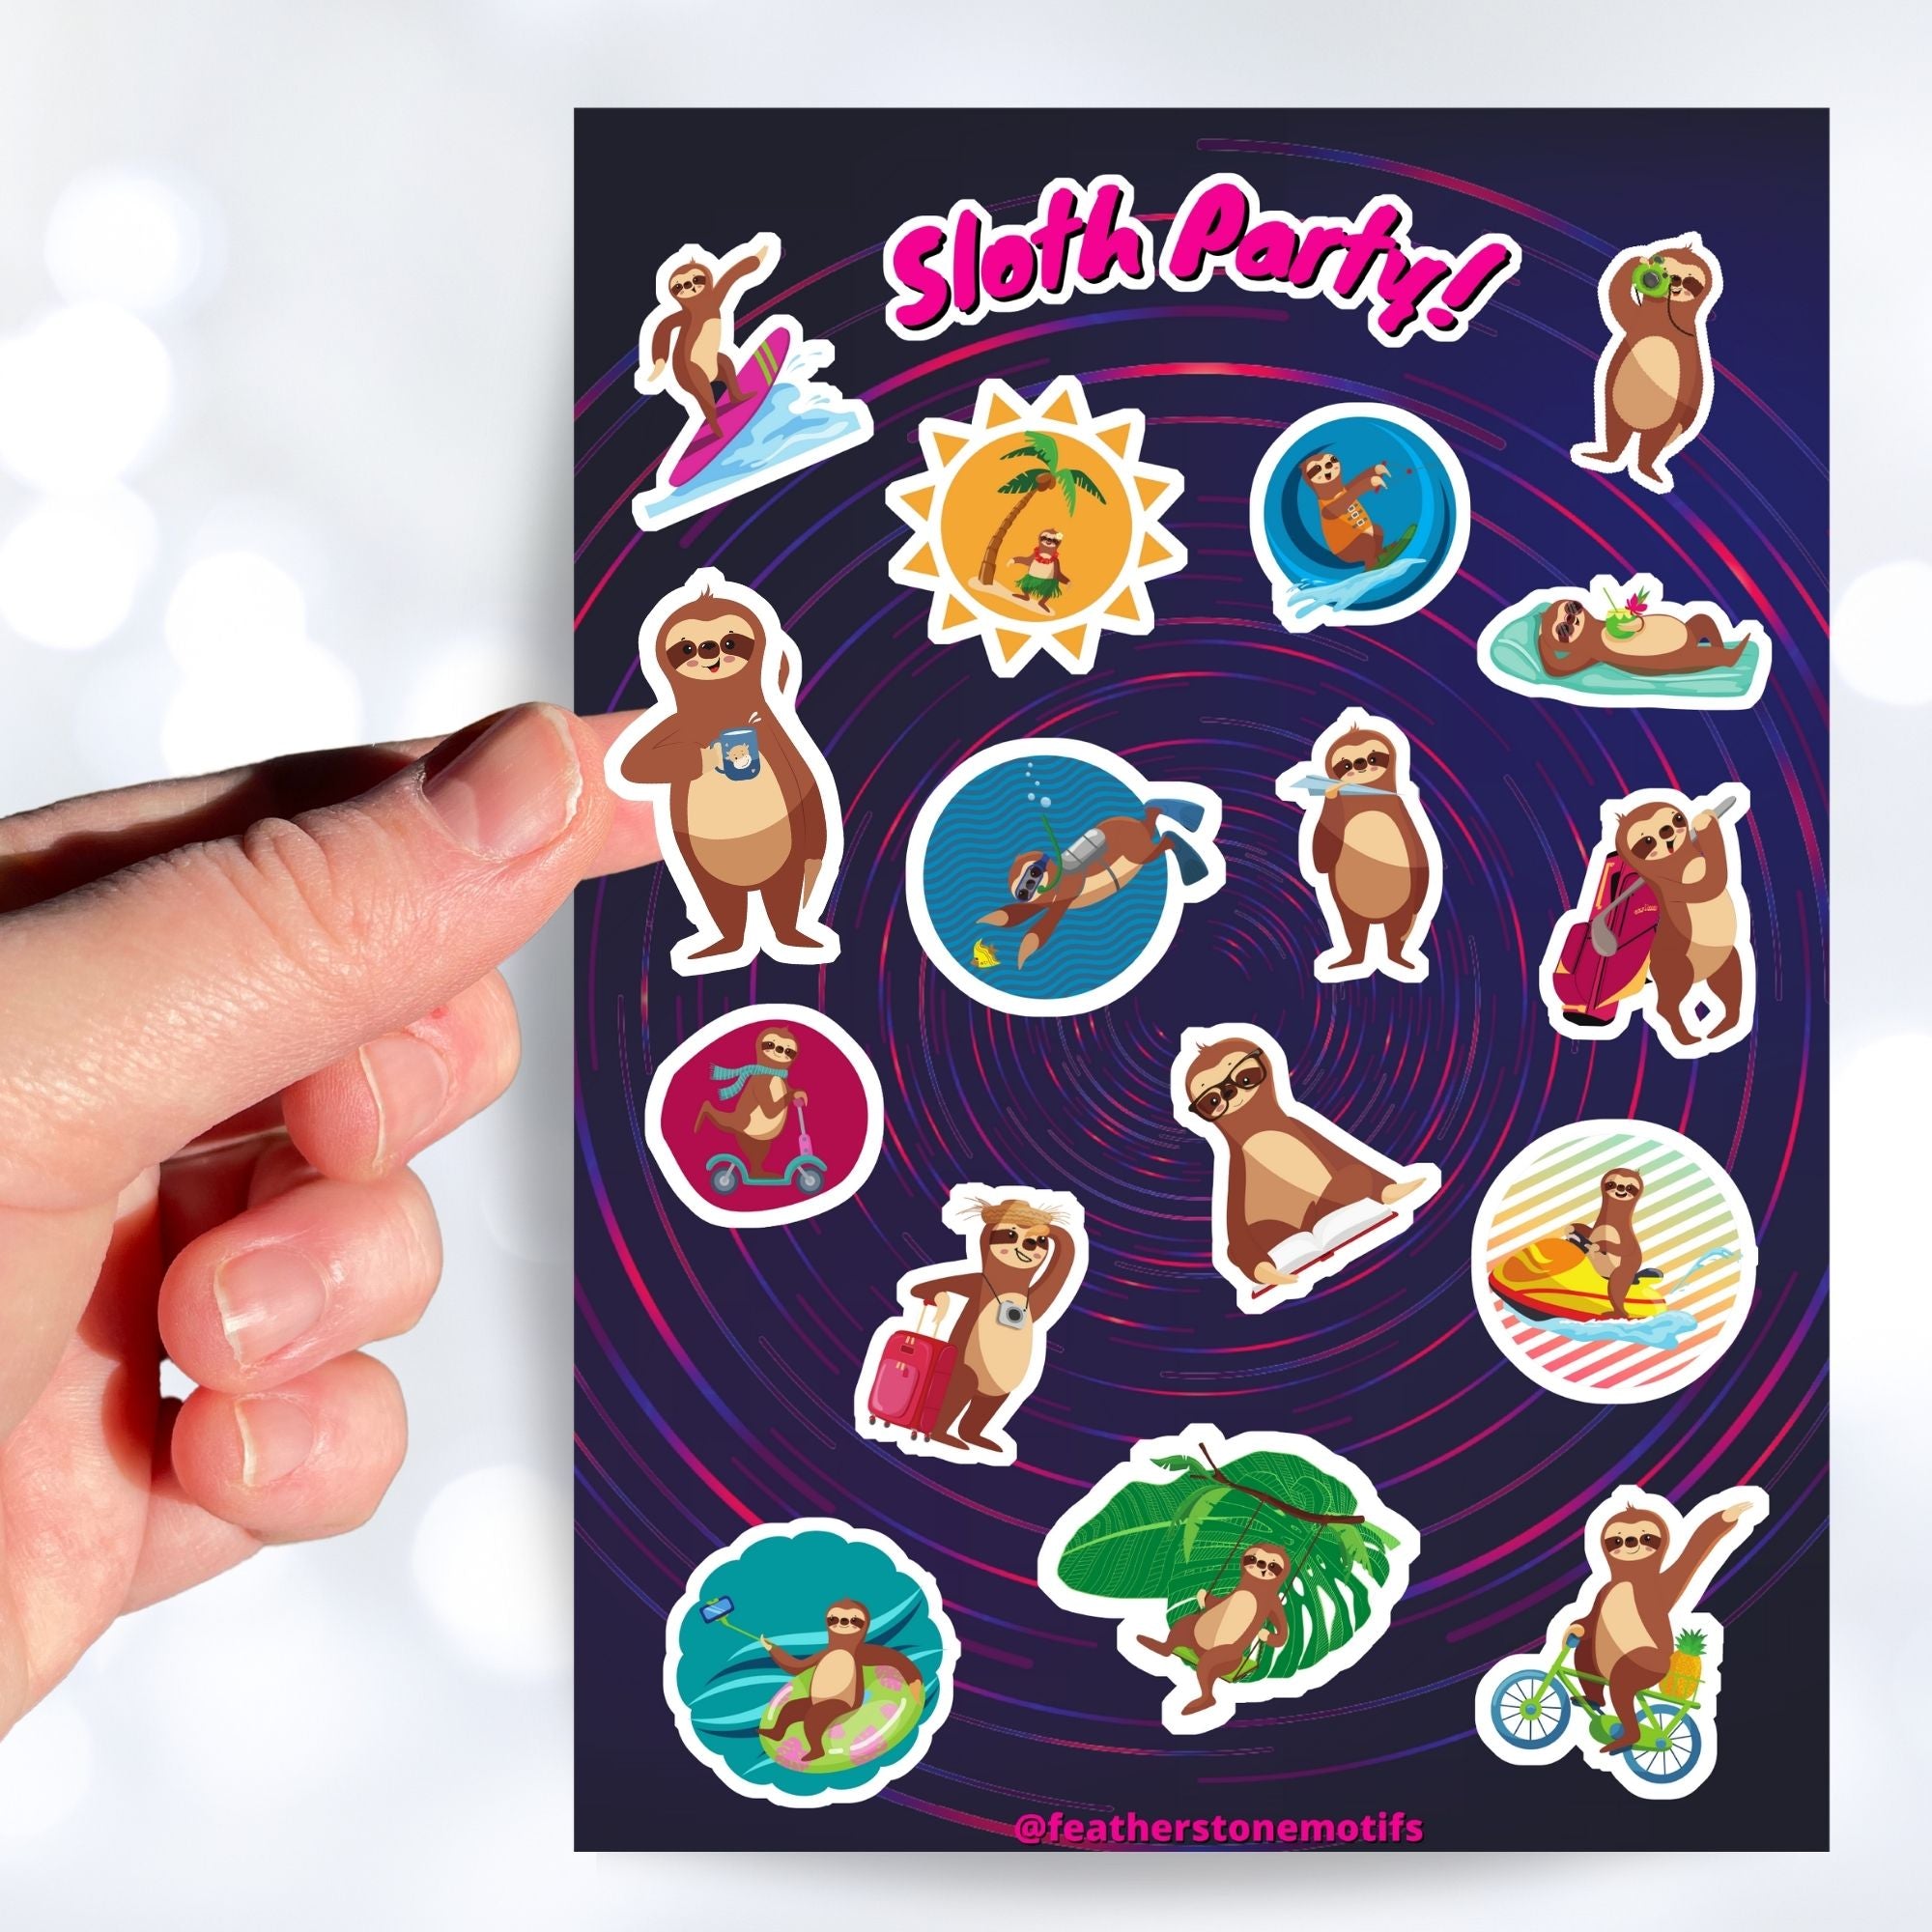 Sloth's on Bikes. Sloth's scuba diving. Sloth's relaxing. This sticker sheet is full of sticker images of sloth's doing all kinds of fun things! This image shows a hand holding a sticker of a sloth with a cup of coffee above the sticker sheet.